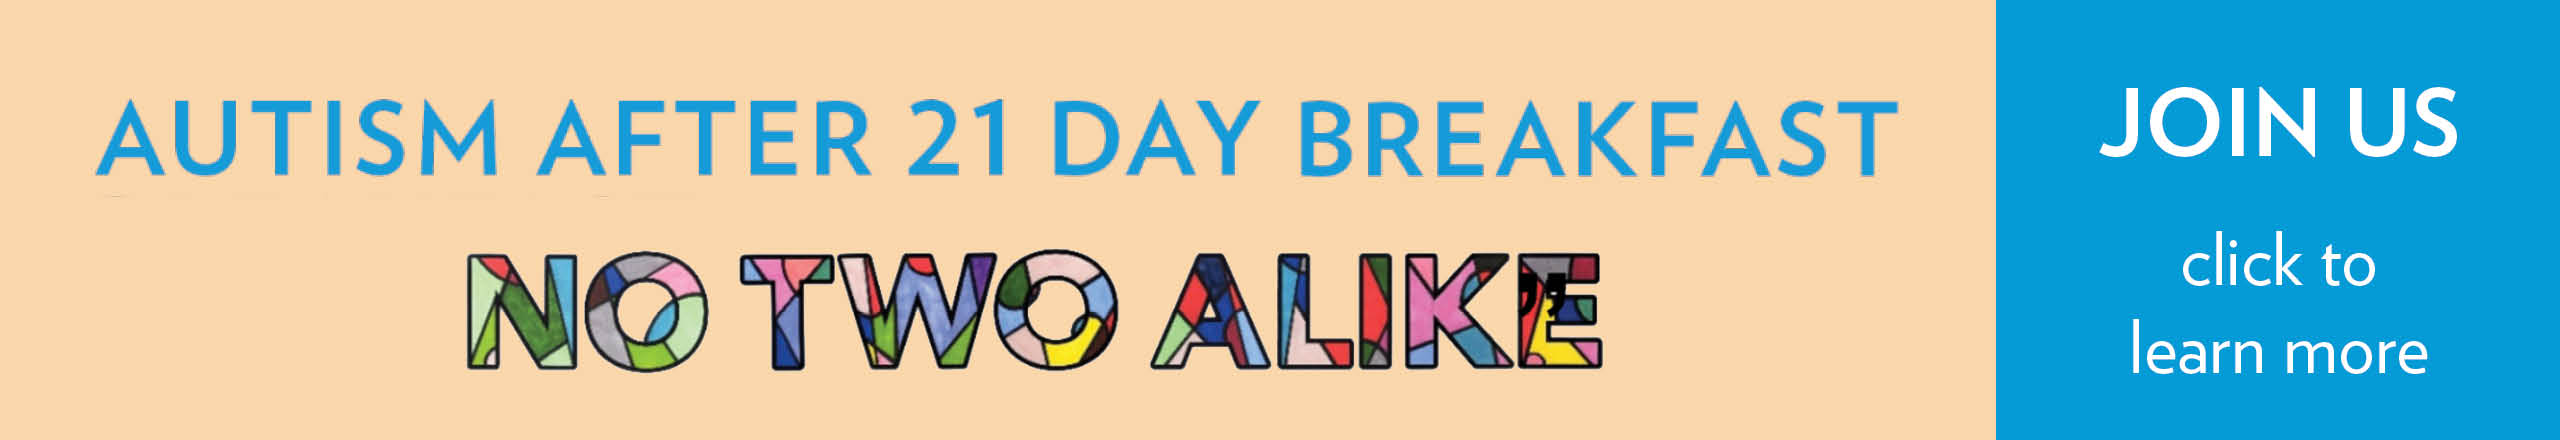 Creme color background with colorful logos that say "Autism After 21 Day Breakfast" and "No Two Alike" with a blue section to the right with white letters that say "Join Us Click here to learn more"